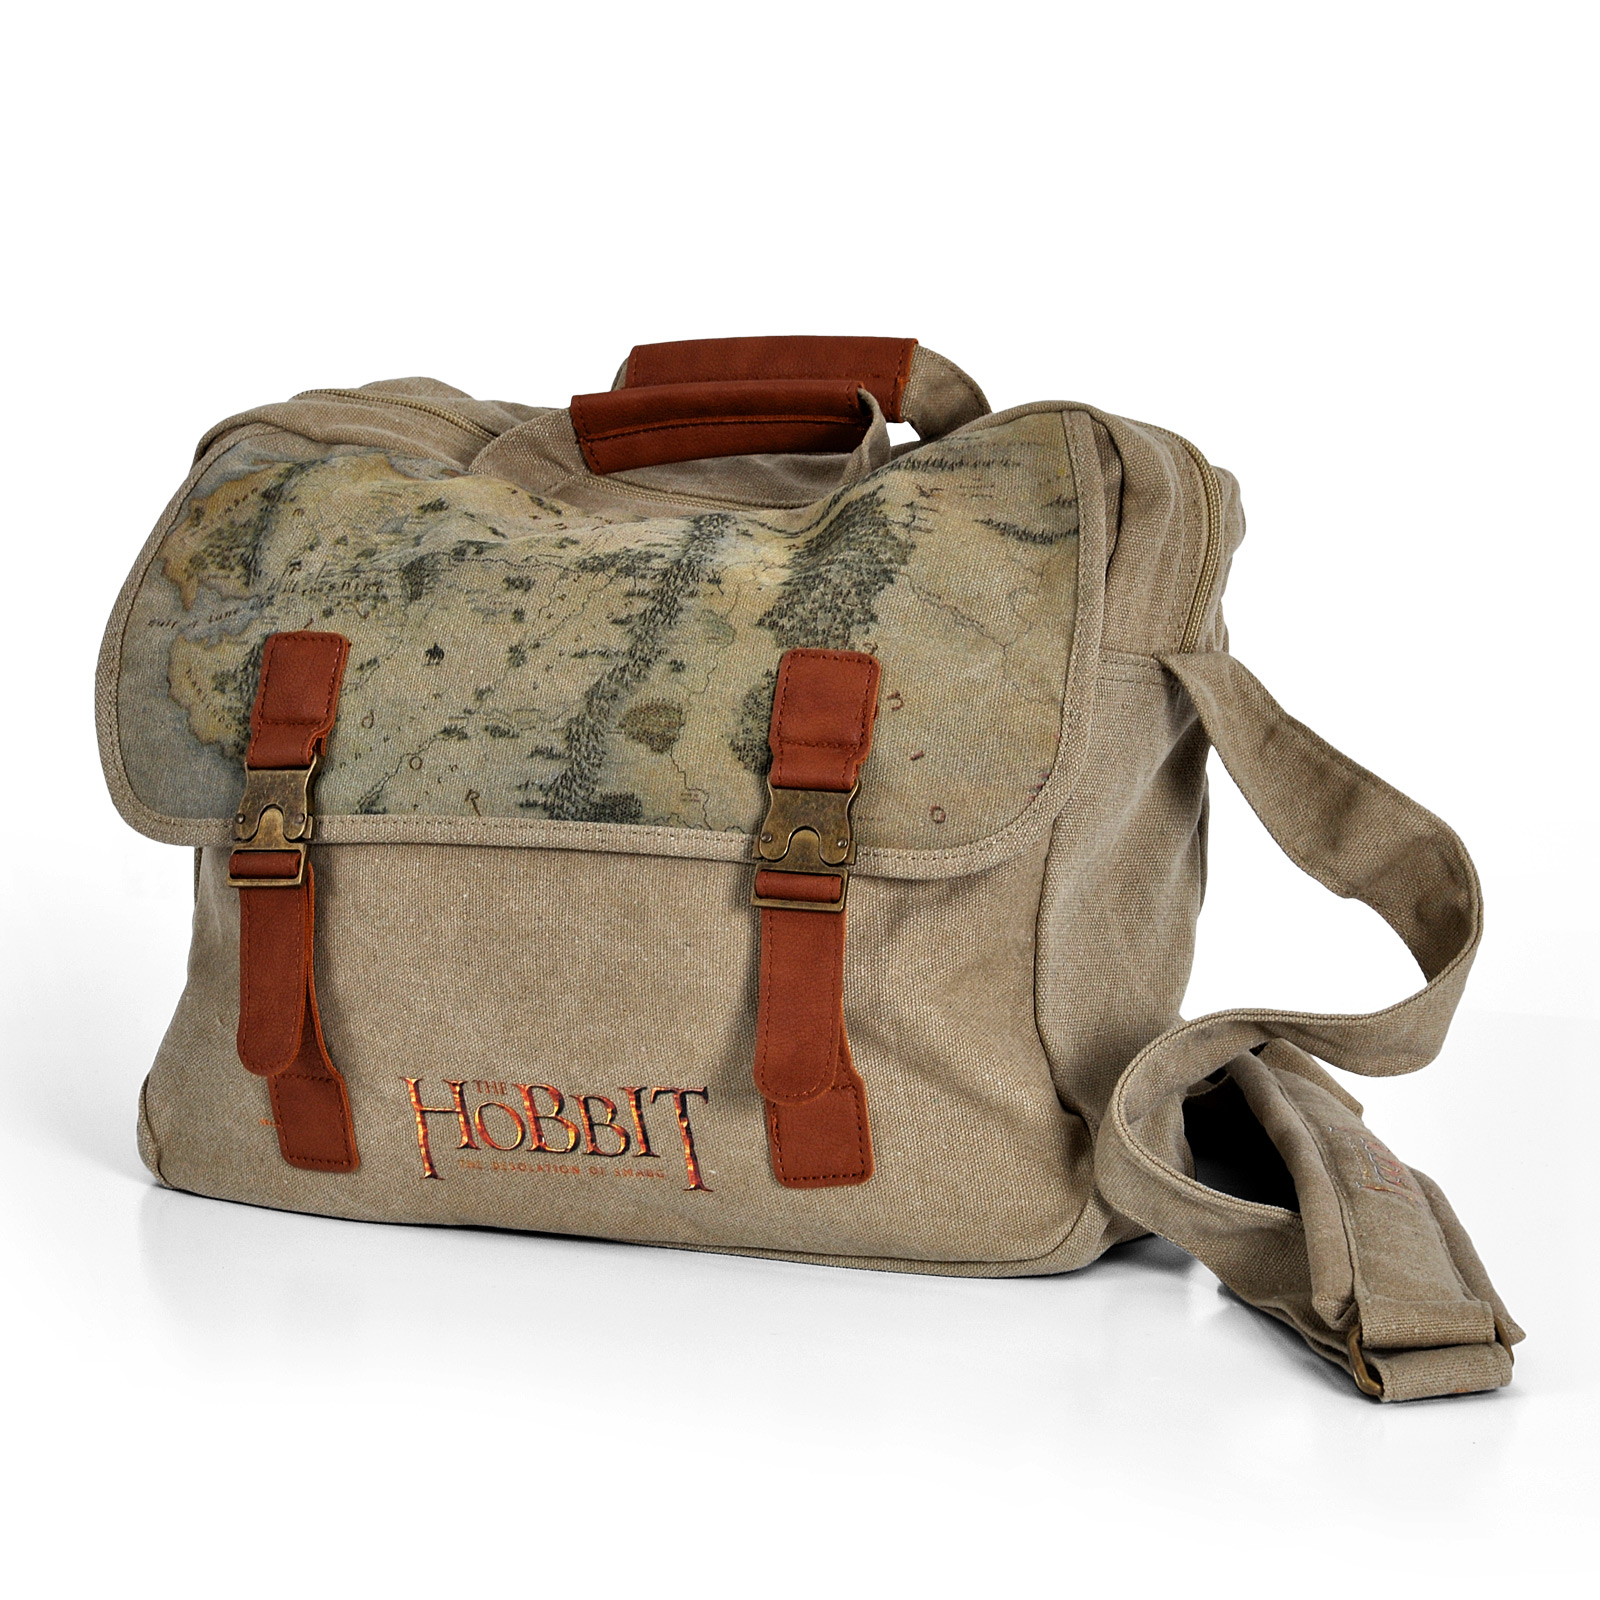 The Hobbit - Middle Earth Canvas Bag